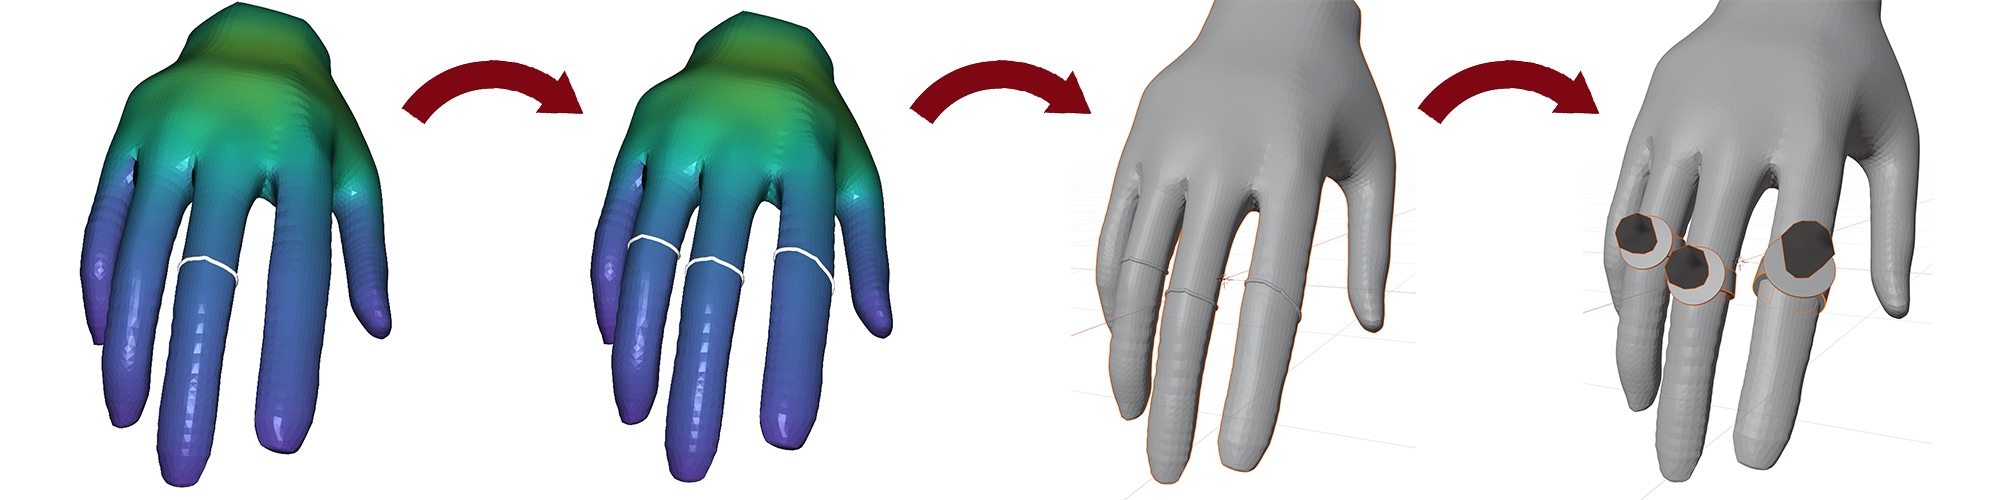 An illustration of geometry propagation using our curve propagation: (Left to right) (1) A single ring is drawn on a finger of the hand; (2) Additional ringplacements are suggested; (3) The ring placements are exported to Blender; (4) Complex geometry (ring pops) are placed and aligned according to the exportedcurves (manually, as an illustrative application).